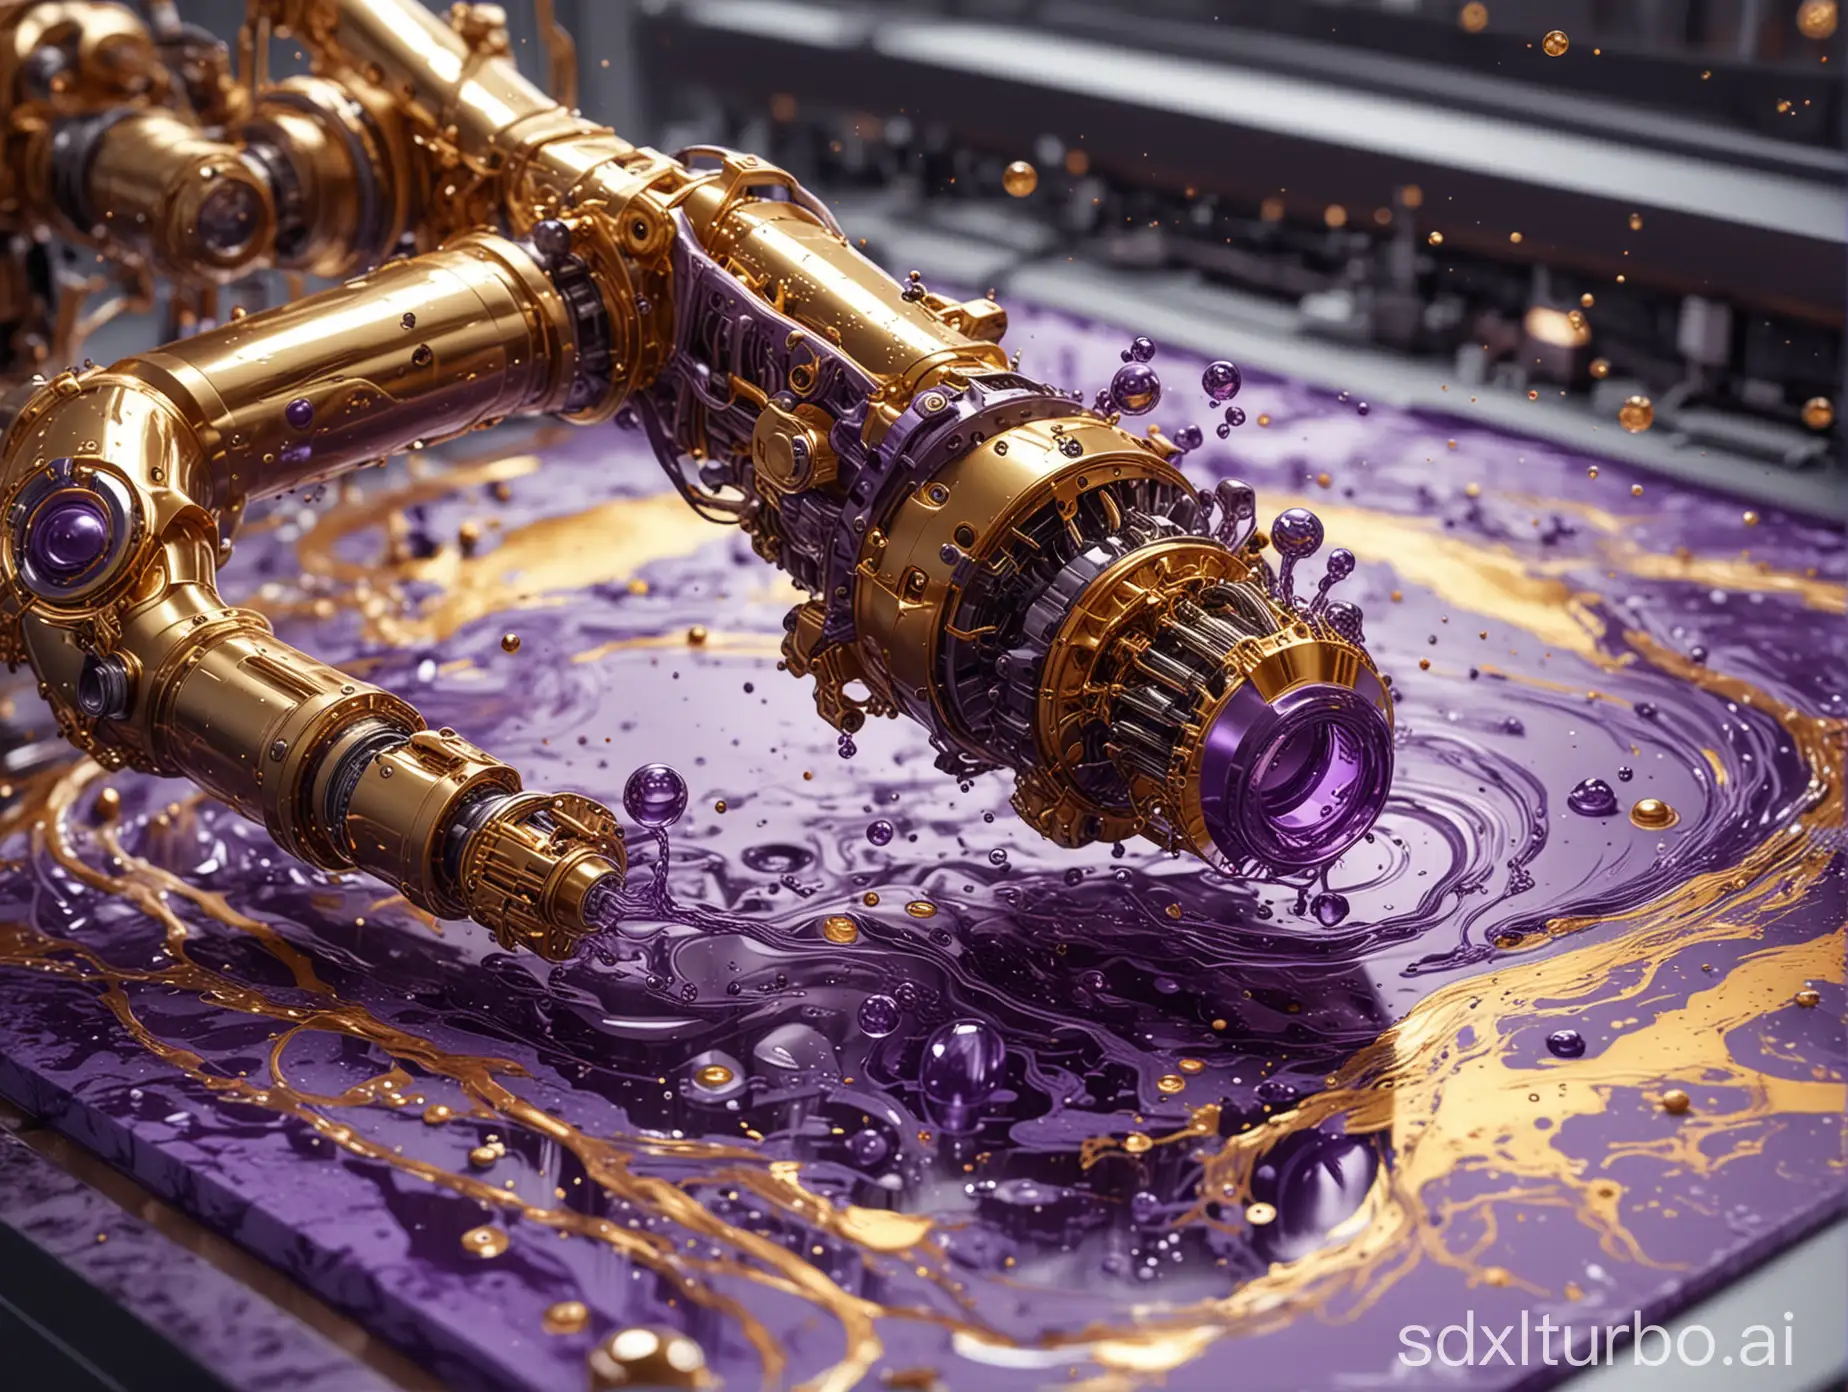 complex thick trifurcated robotic cnc surgical arm cybernetic symbiosis hybrid mri 3 d printer machine printing some highly detailed beautiful liquid marble textures with big oil bubbles. harmonic chromatic golden tones coloured abstraction with purple splashes. ultradetailed realistic art in inspection laboratory control panel room